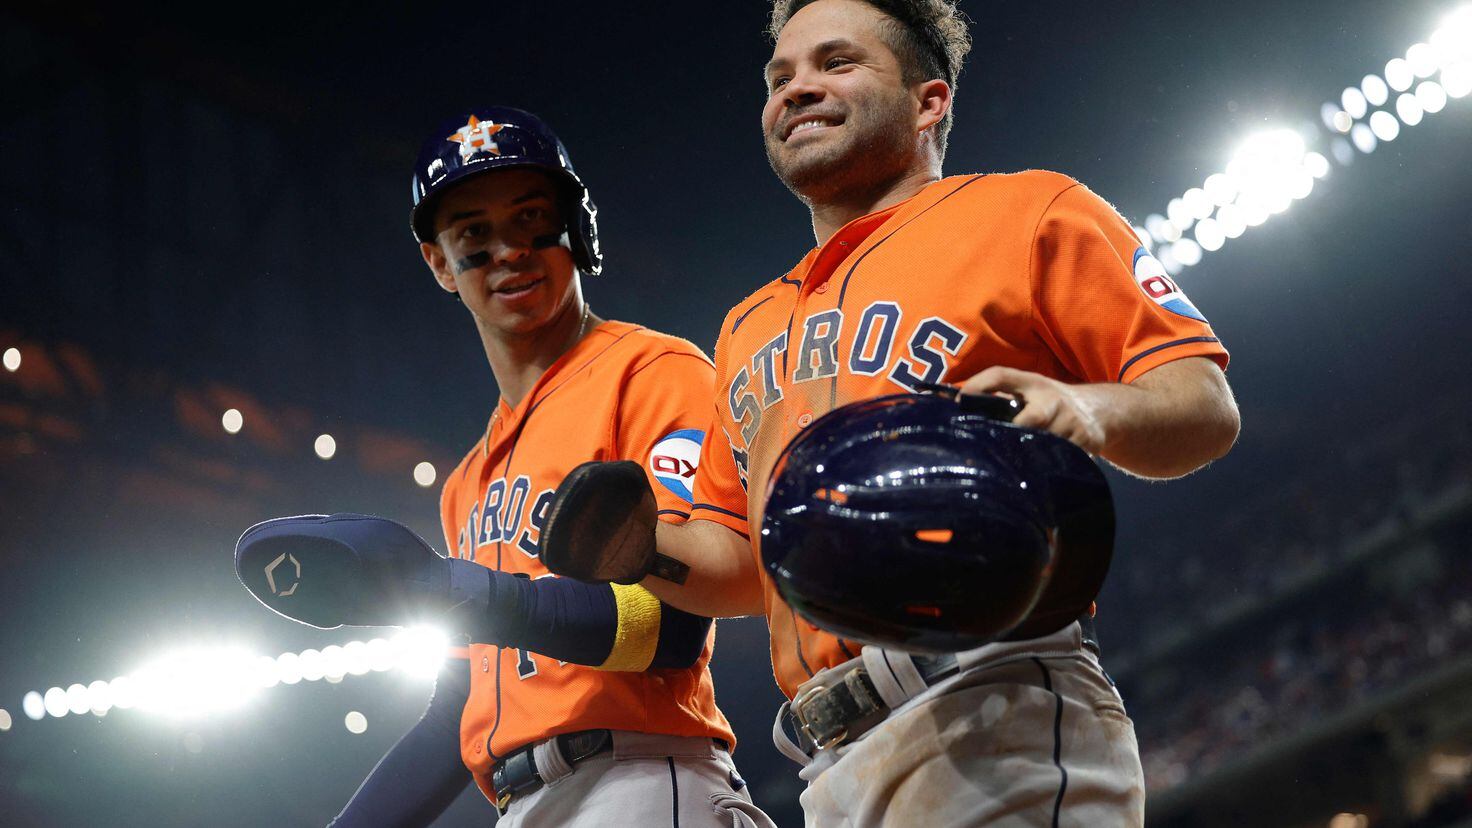 Rangers vs Astros live online: stats, scores and updates